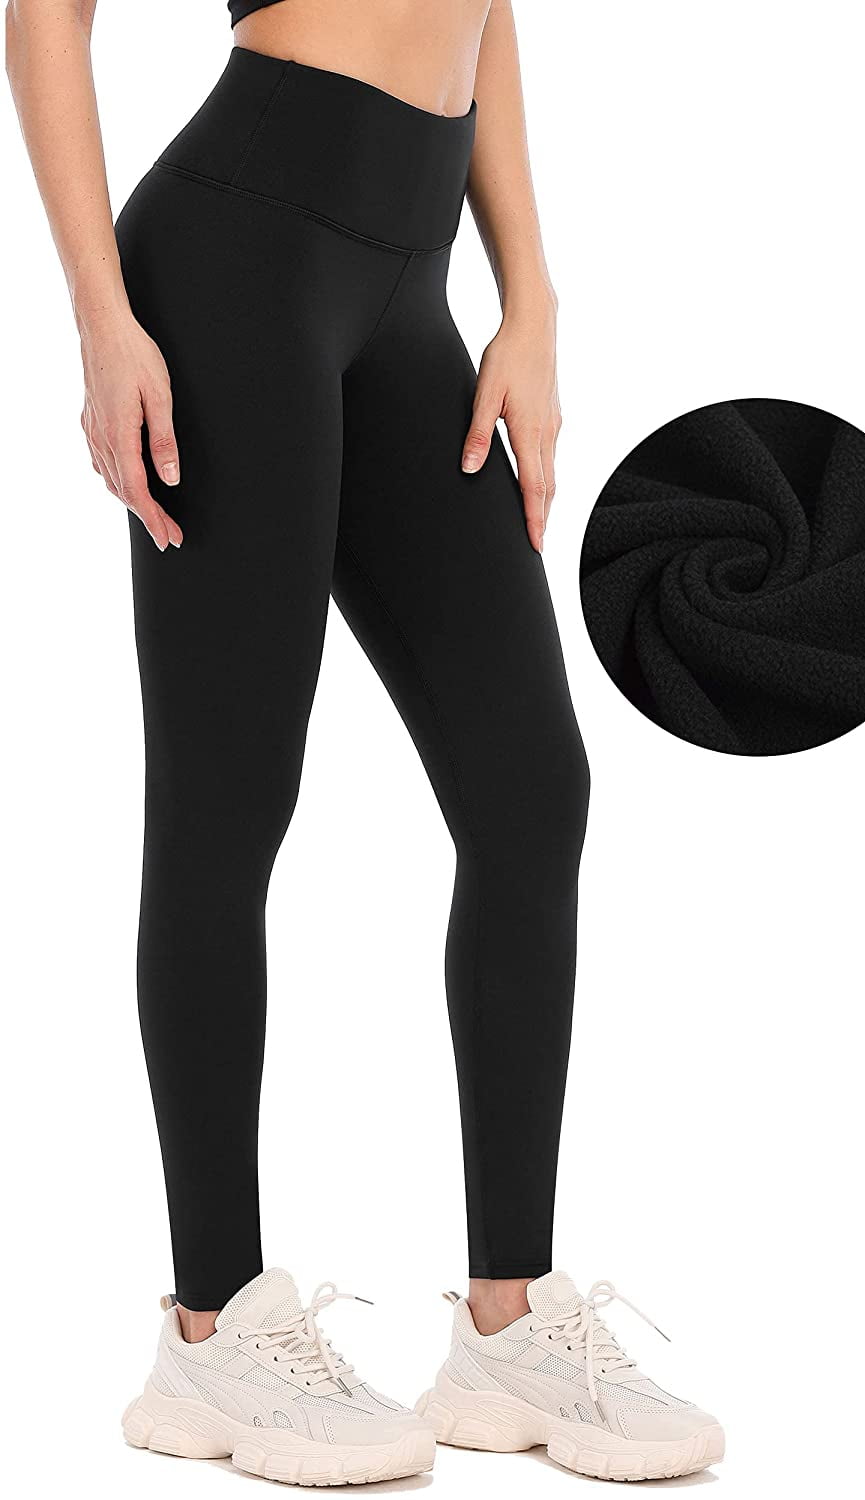 Women's Fleece Lined Leggings Winter Thermal Insulated Workout Yoga Pants  with Pockets 